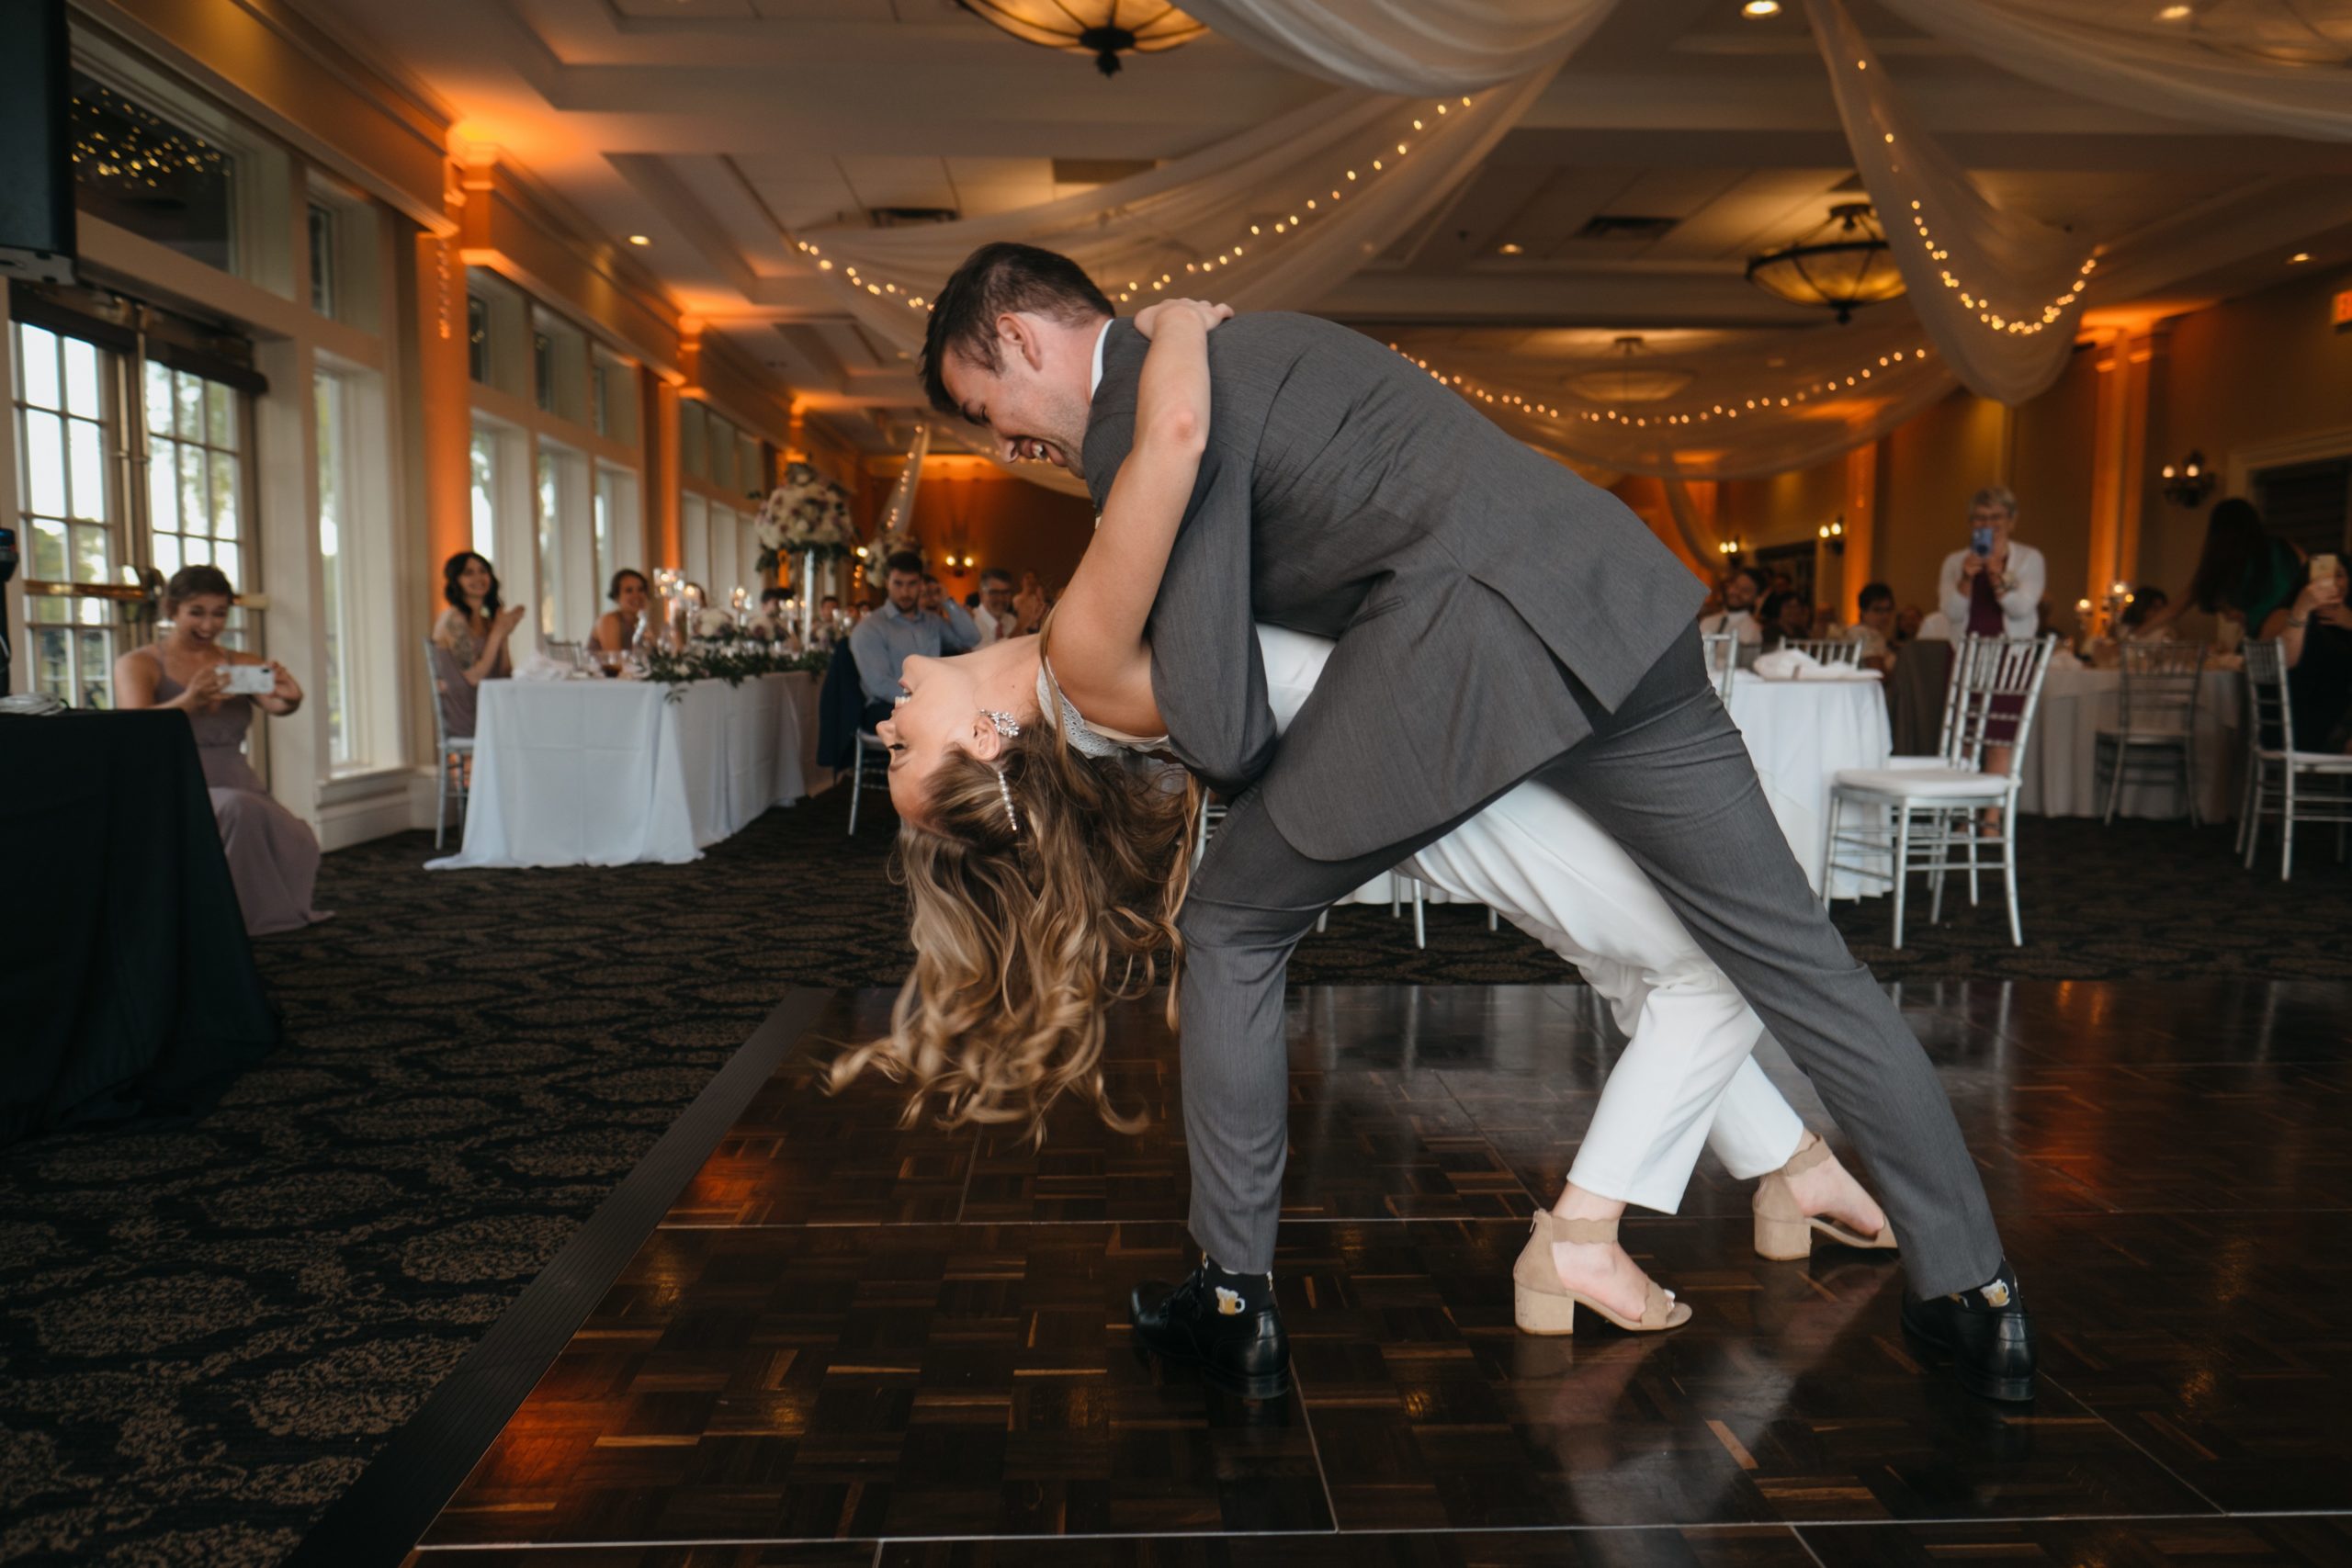 Choreographed First dance